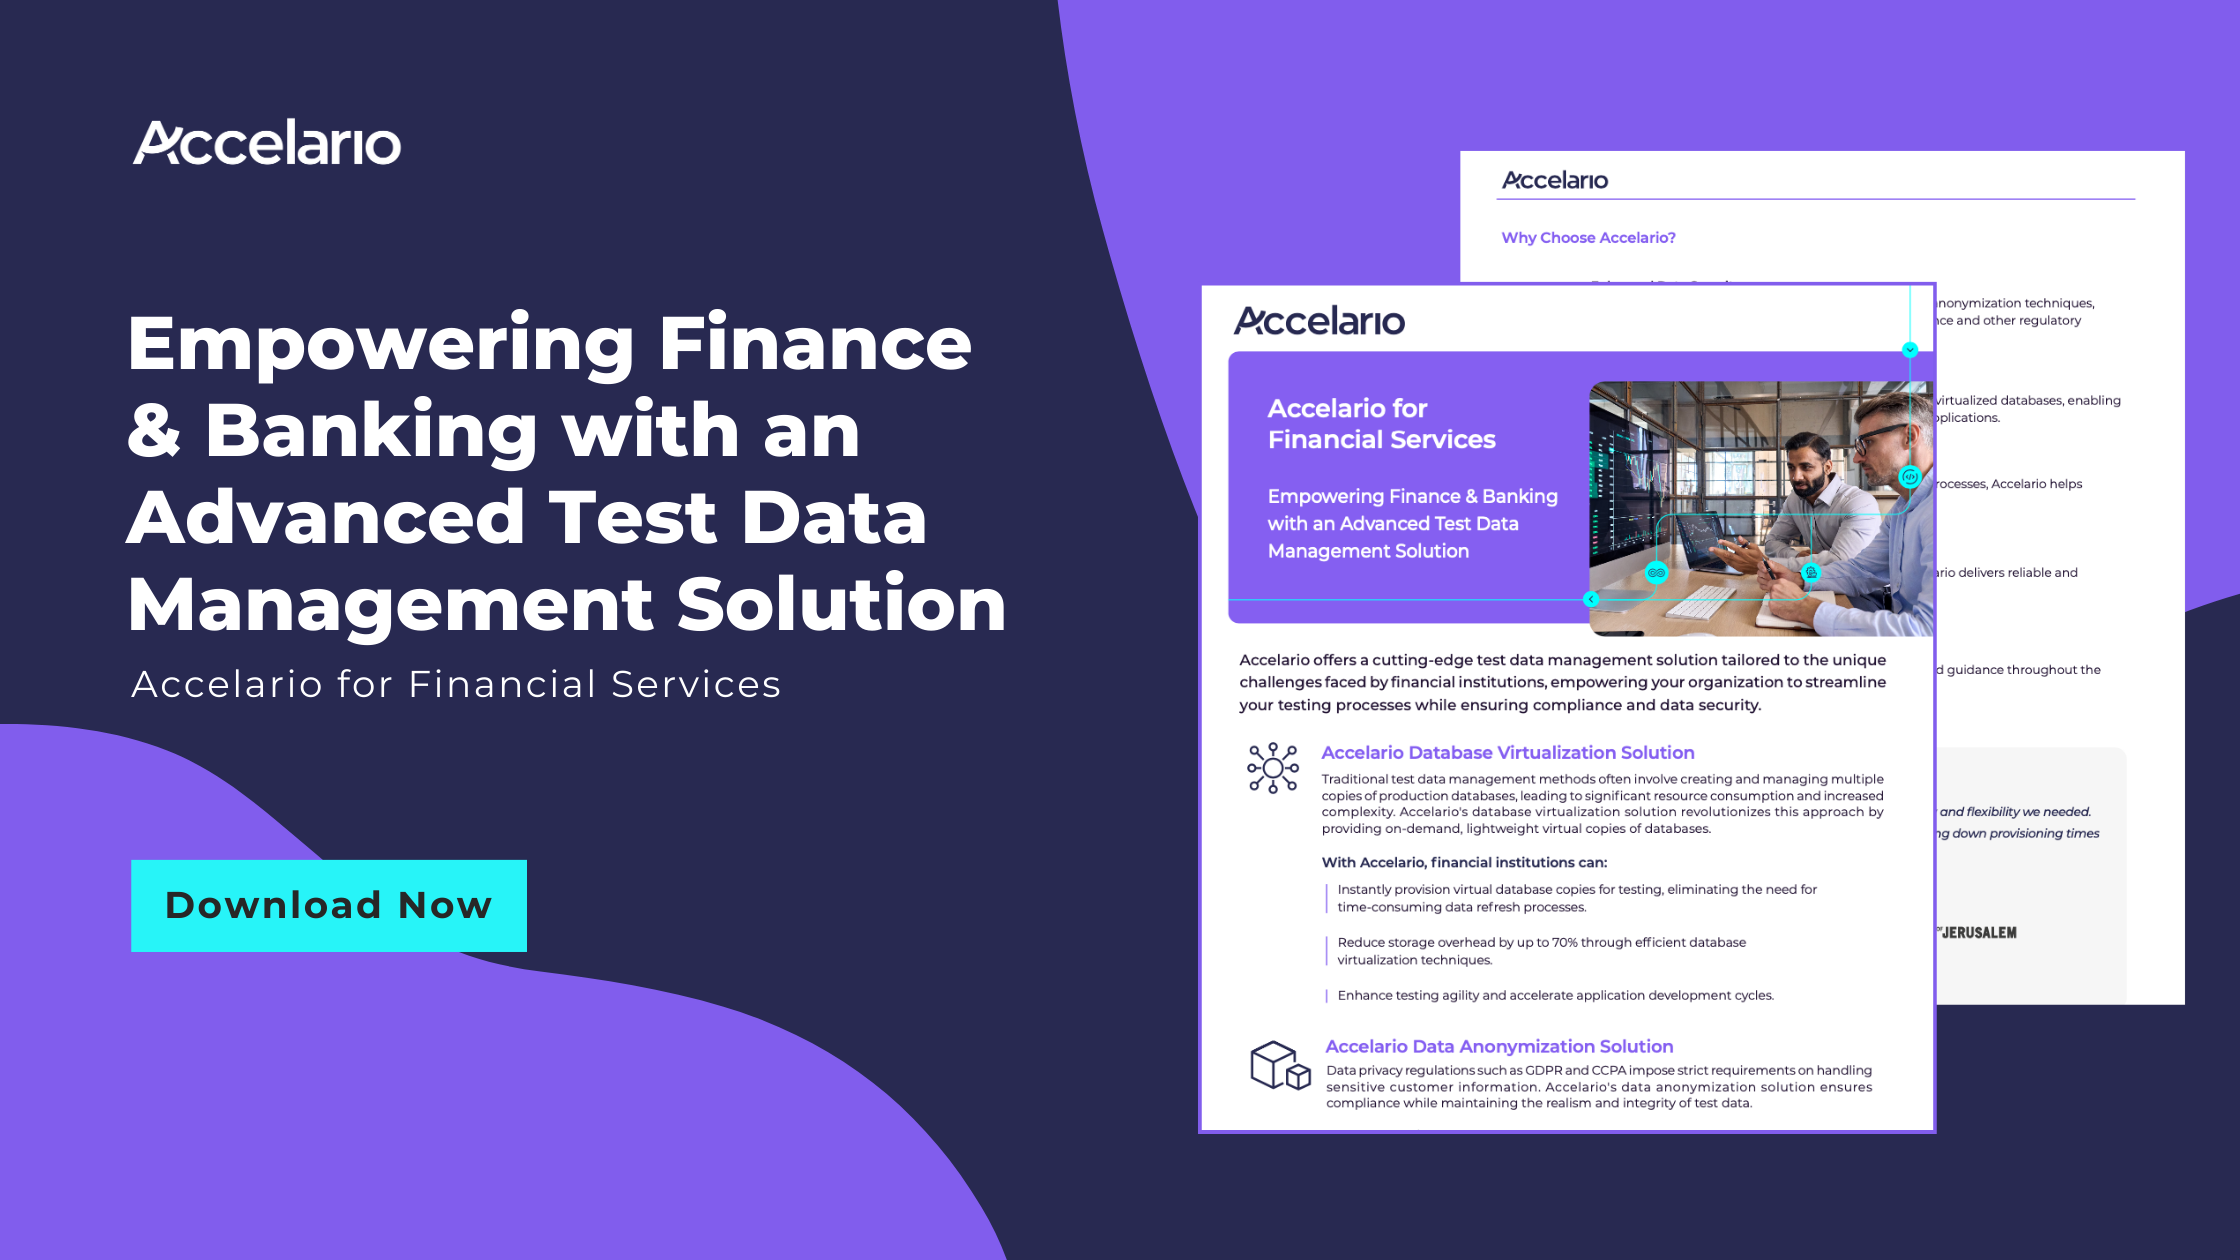 Empowering Finance & Banking with an Advanced Test Data Management Solution